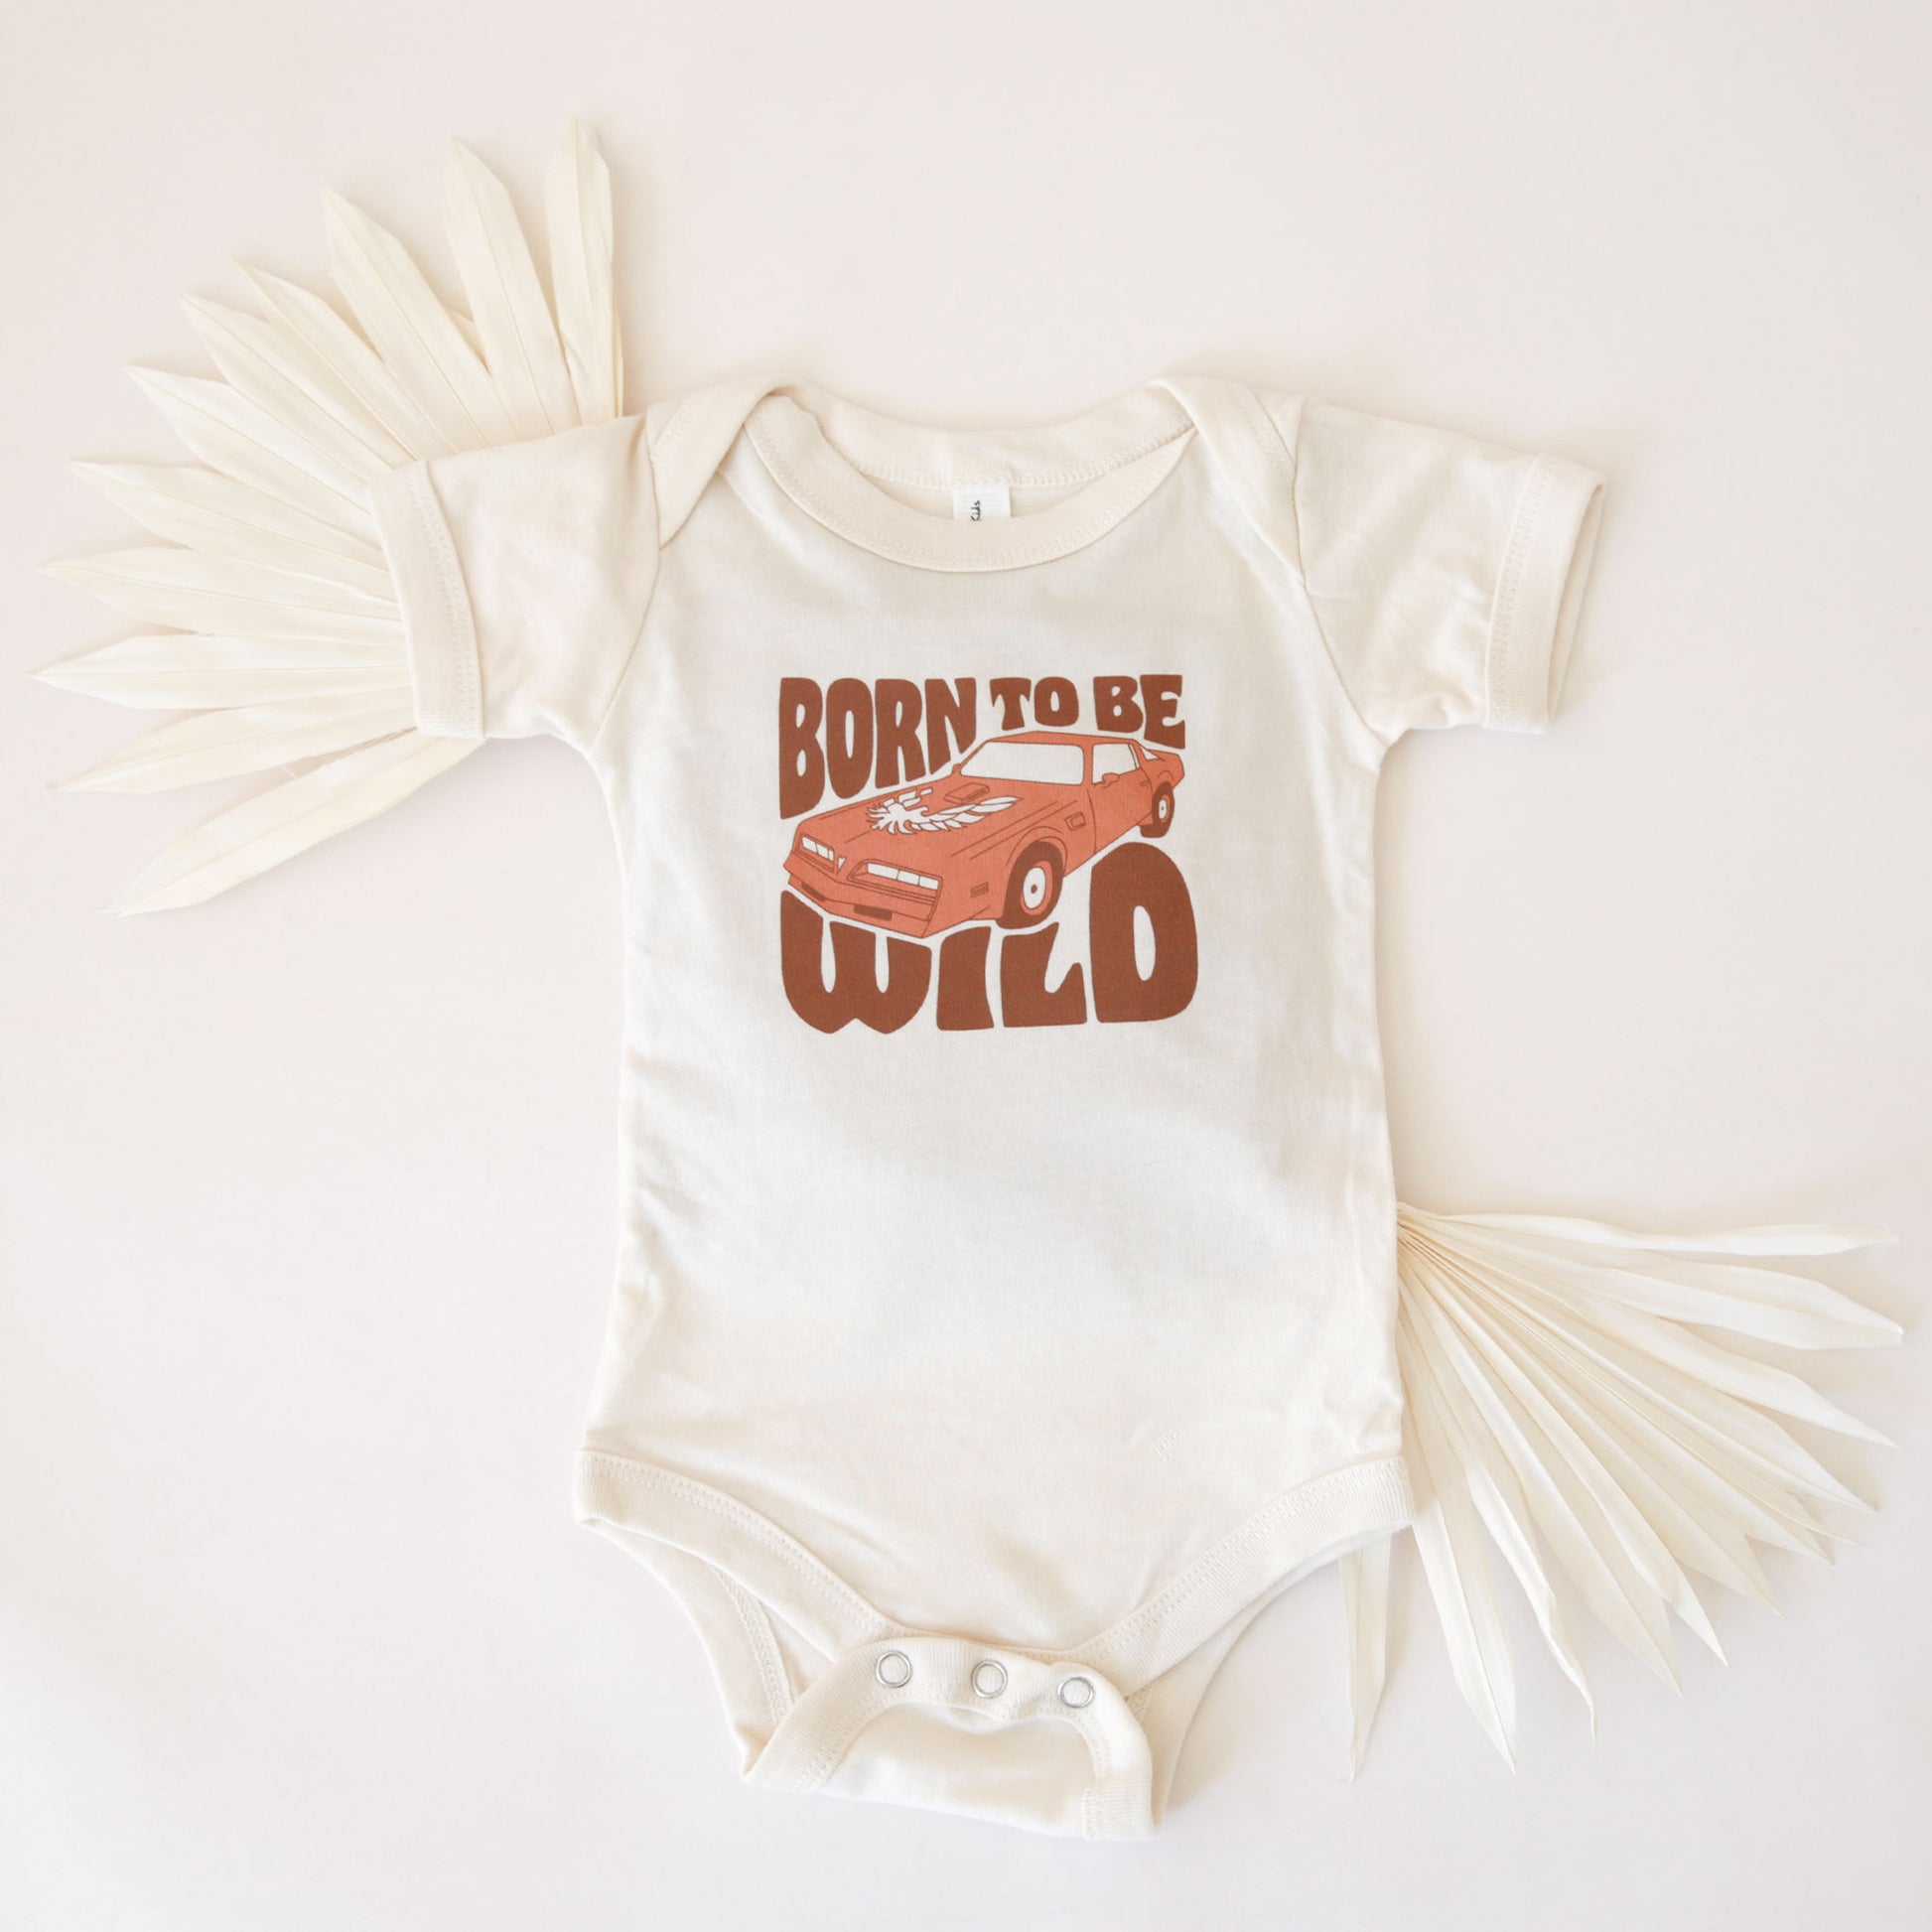 A white cotton onesie with a sports car and the text, "Born To Be Wild" in a brown groovy font.